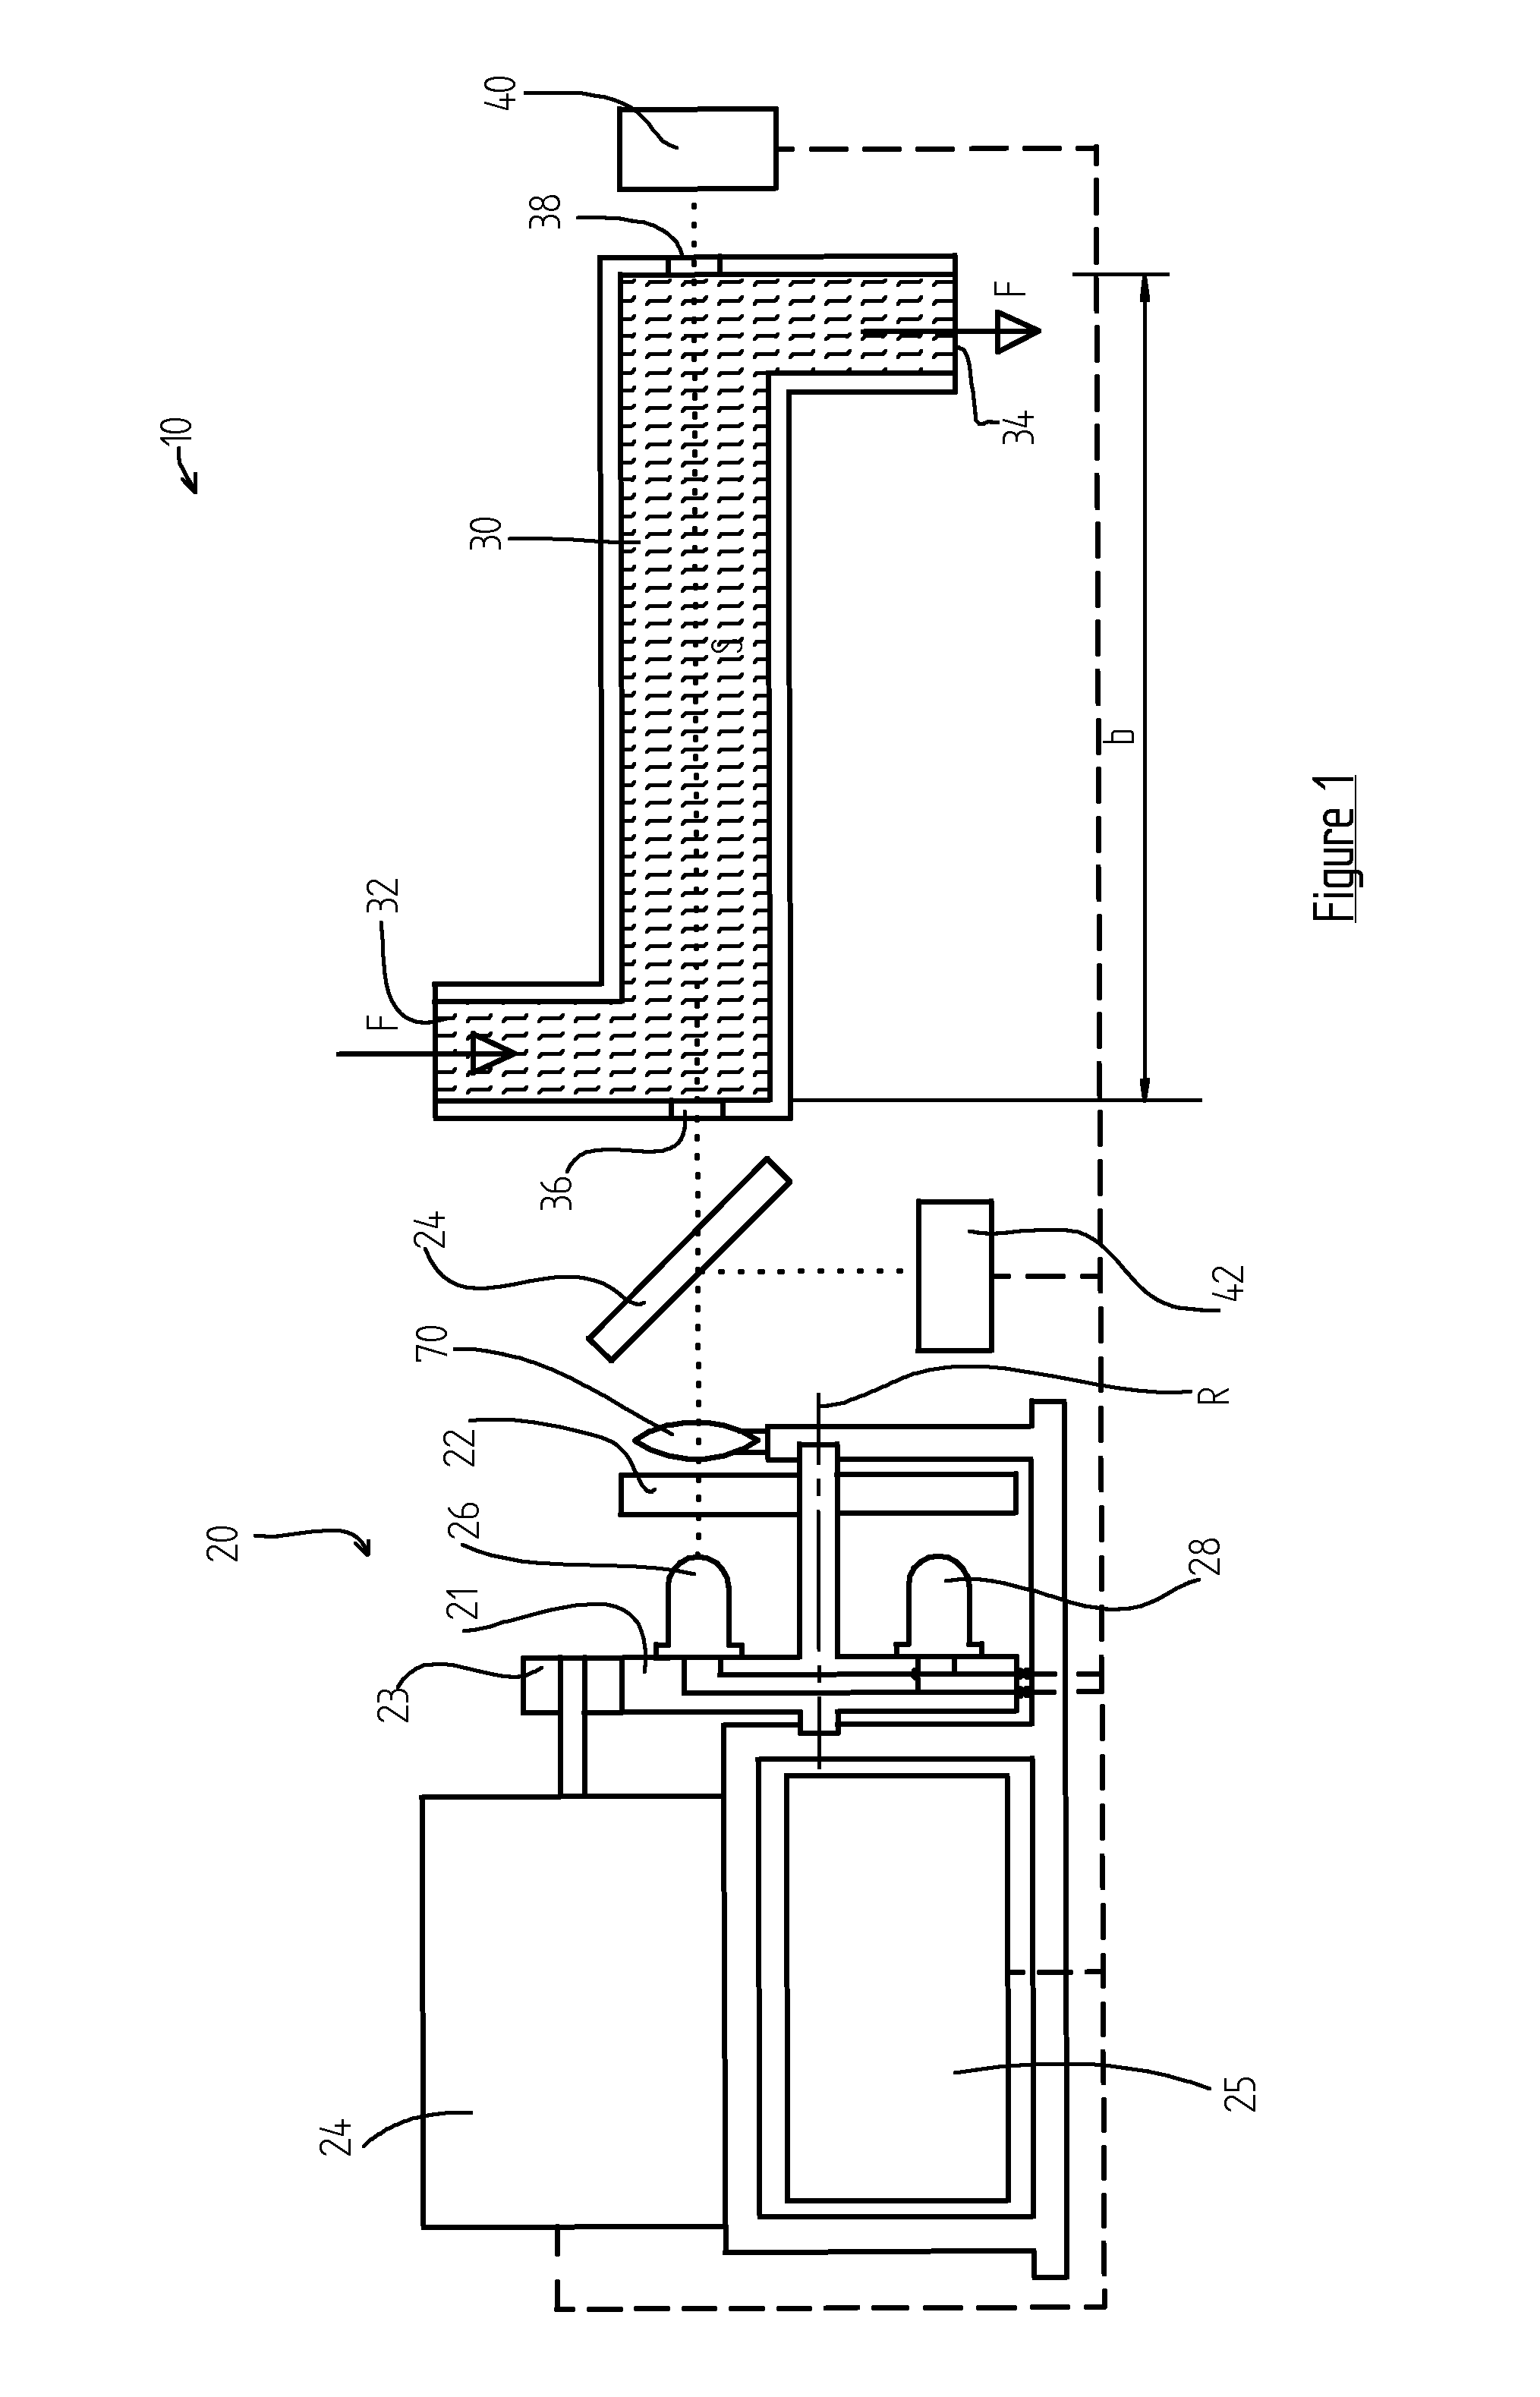 Methods and apparatus for measuring the light absorbance of a substance in a solution